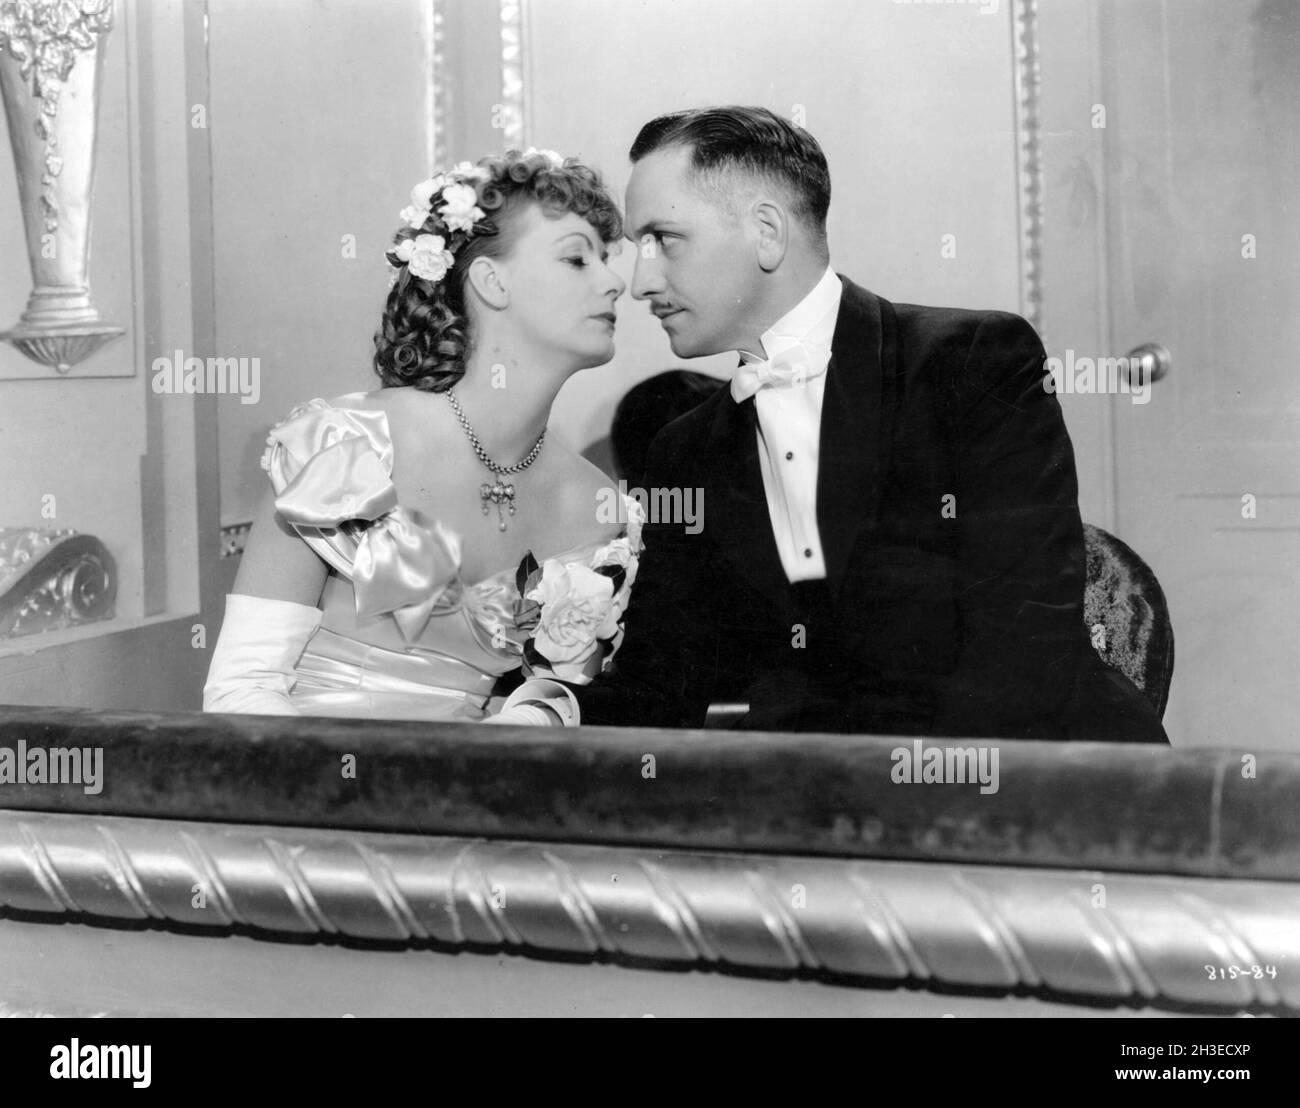 FREDRIC MARCH and GRETA GARBO in ANNA KARENINA (1935), directed by CLARENCE BROWN. Credit: M.G.M. / Album Stock Photo